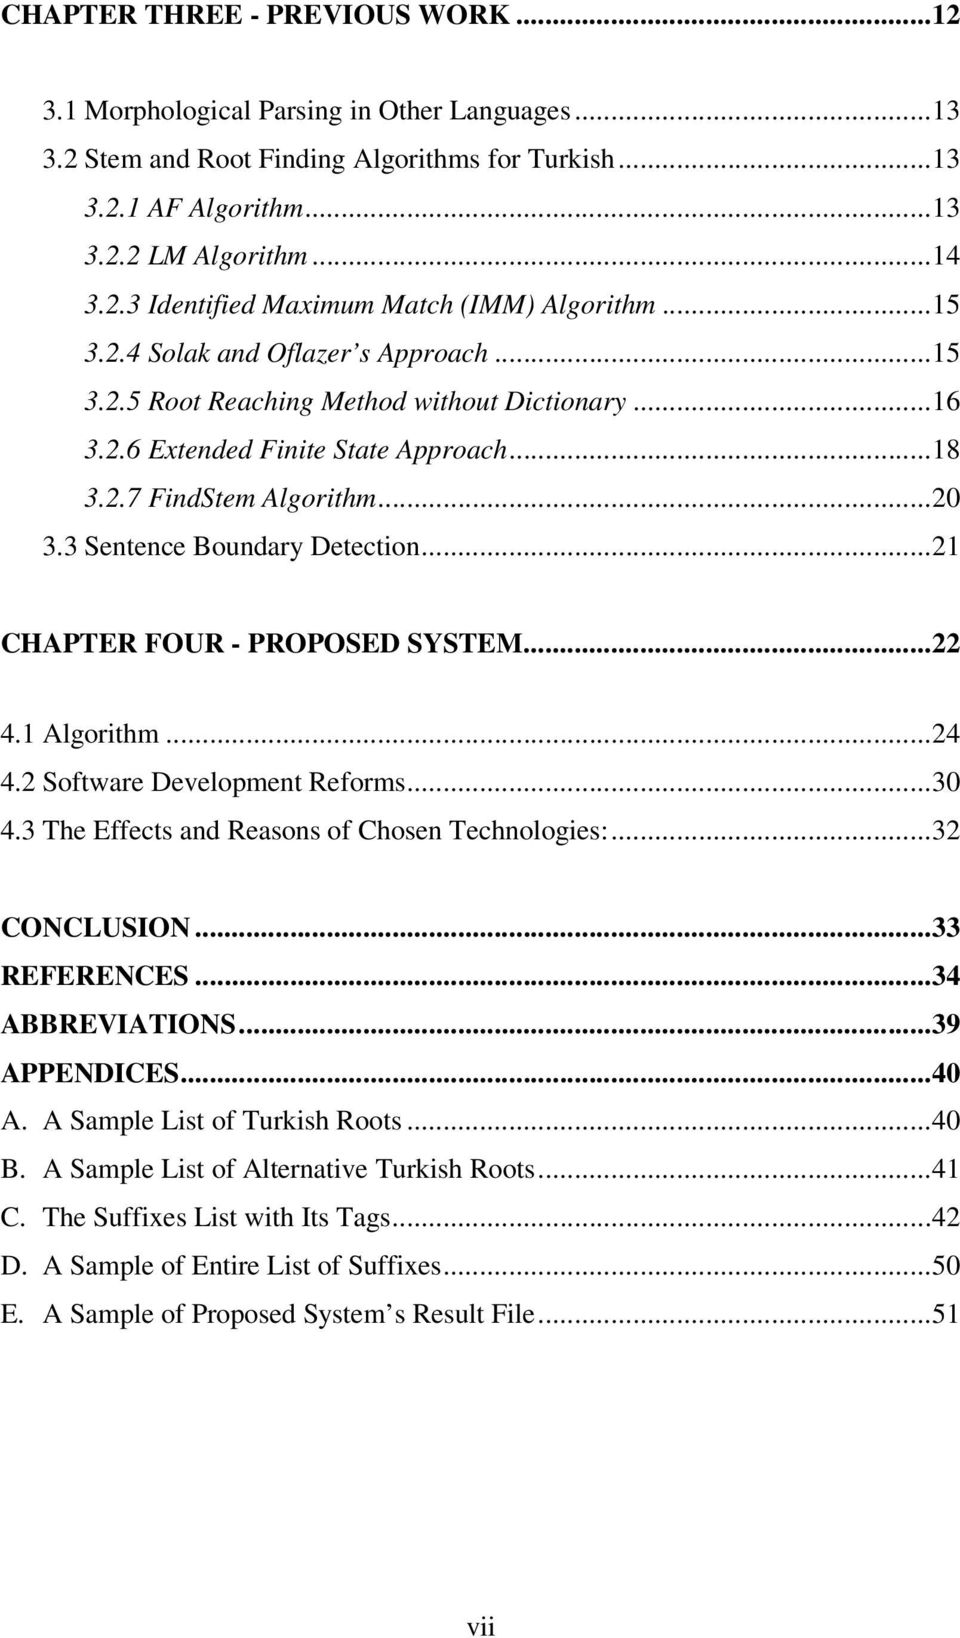 ..21 CHAPTER FOUR - PROPOSED SYSTEM...22 4.1 Algorithm...24 4.2 Software Development Reforms...30 4.3 The Effects and Reasons of Chosen Technologies:...32 CONCLUSION...33 REFERENCES...34 ABBREVIATIONS.